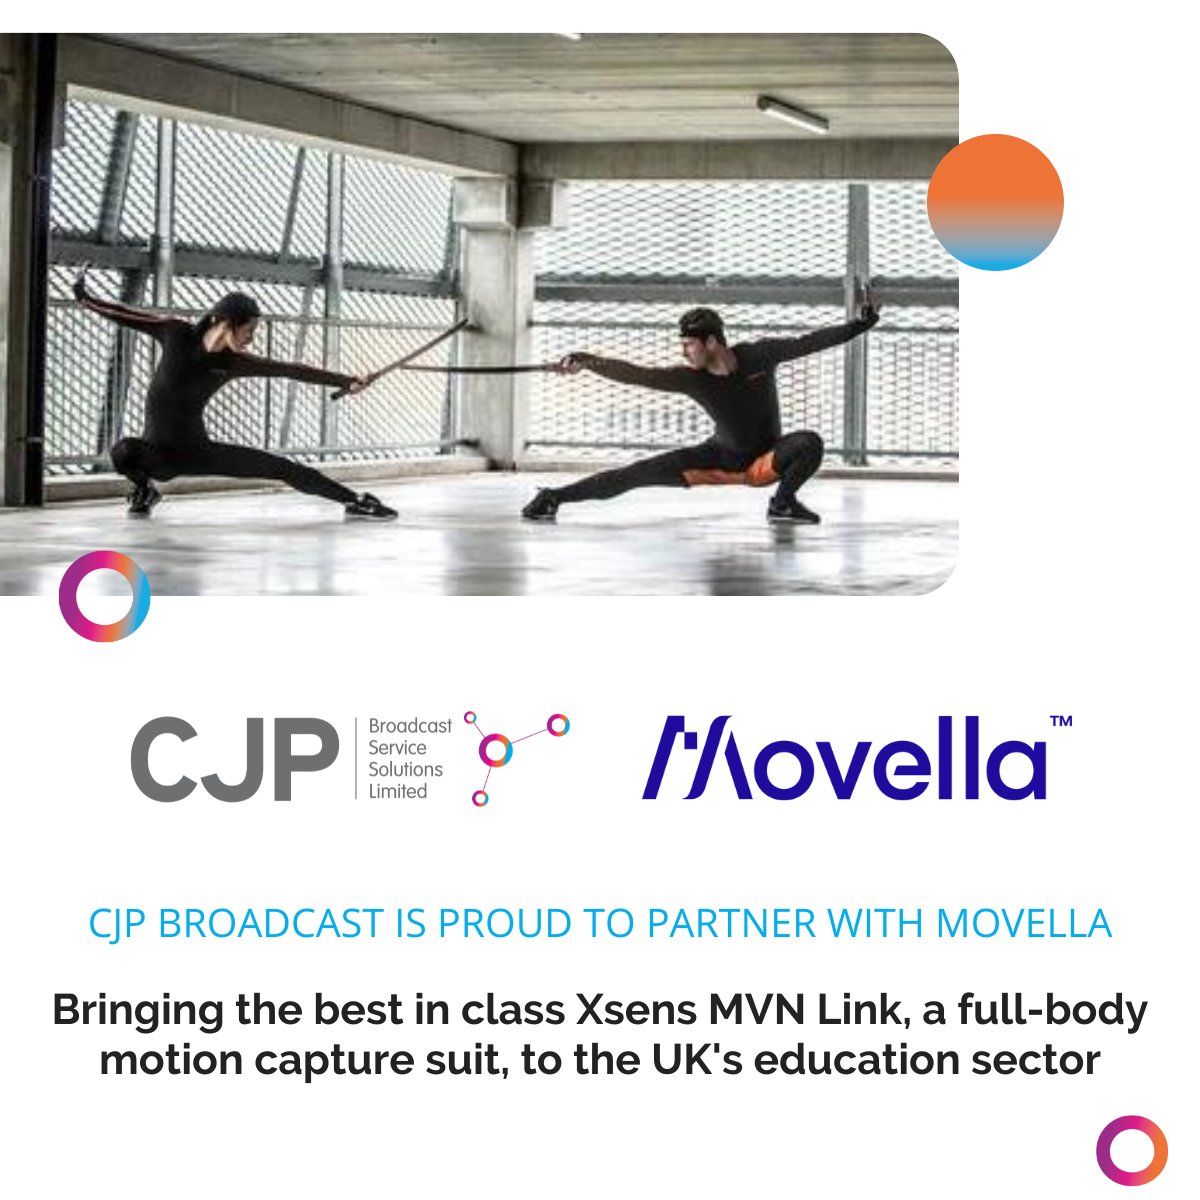 In partnership with @movellainc (Xsens), we're bringing the MVN Link to UK educational facilities. High-precision motion capture technology, now in your classrooms. Want to know more? bit.ly/3oKSChl #EdTech #Xsens #CJP